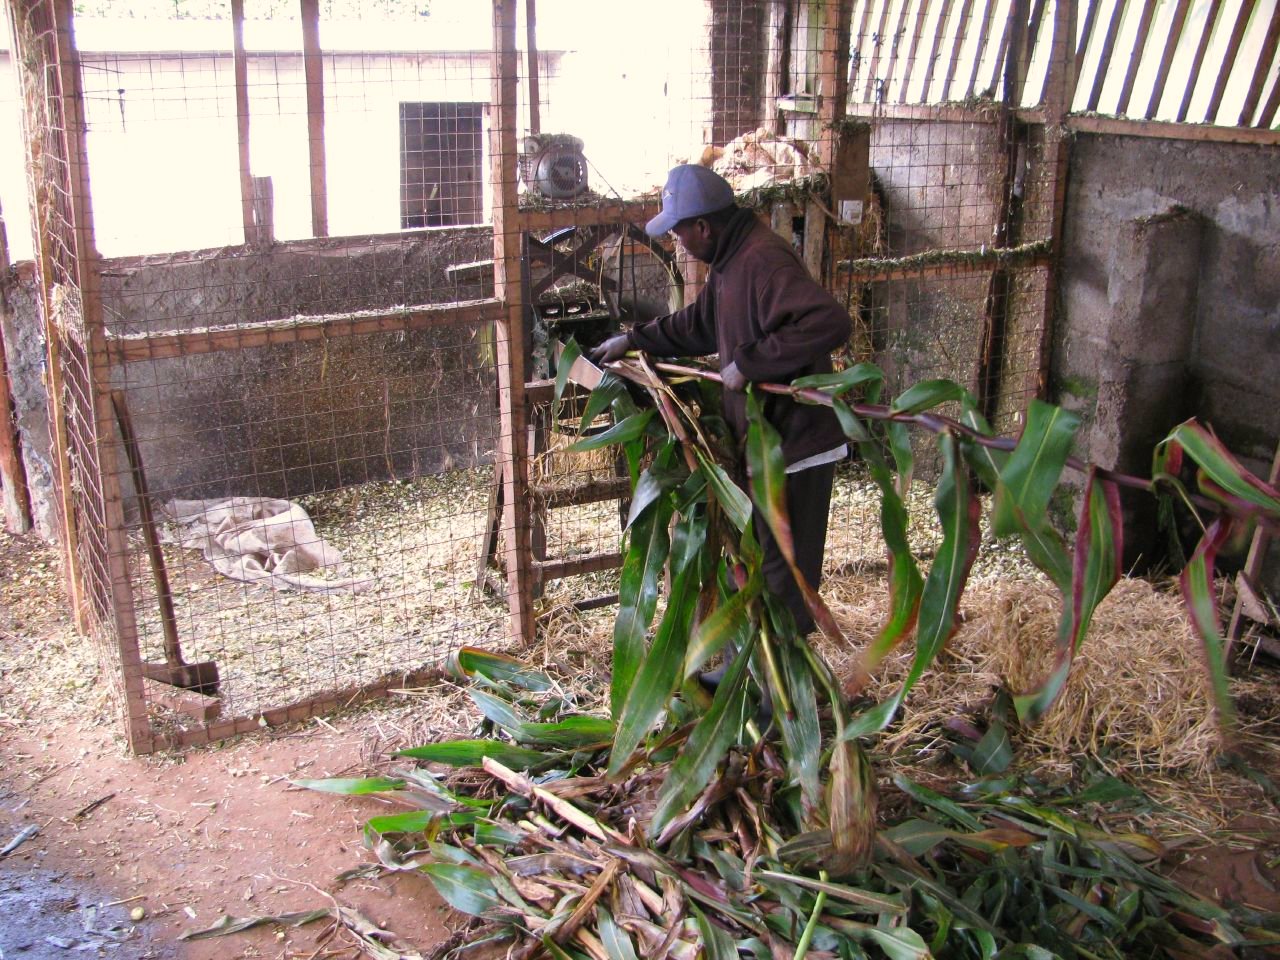 man holding bananas in a barn surrounded by bamboo